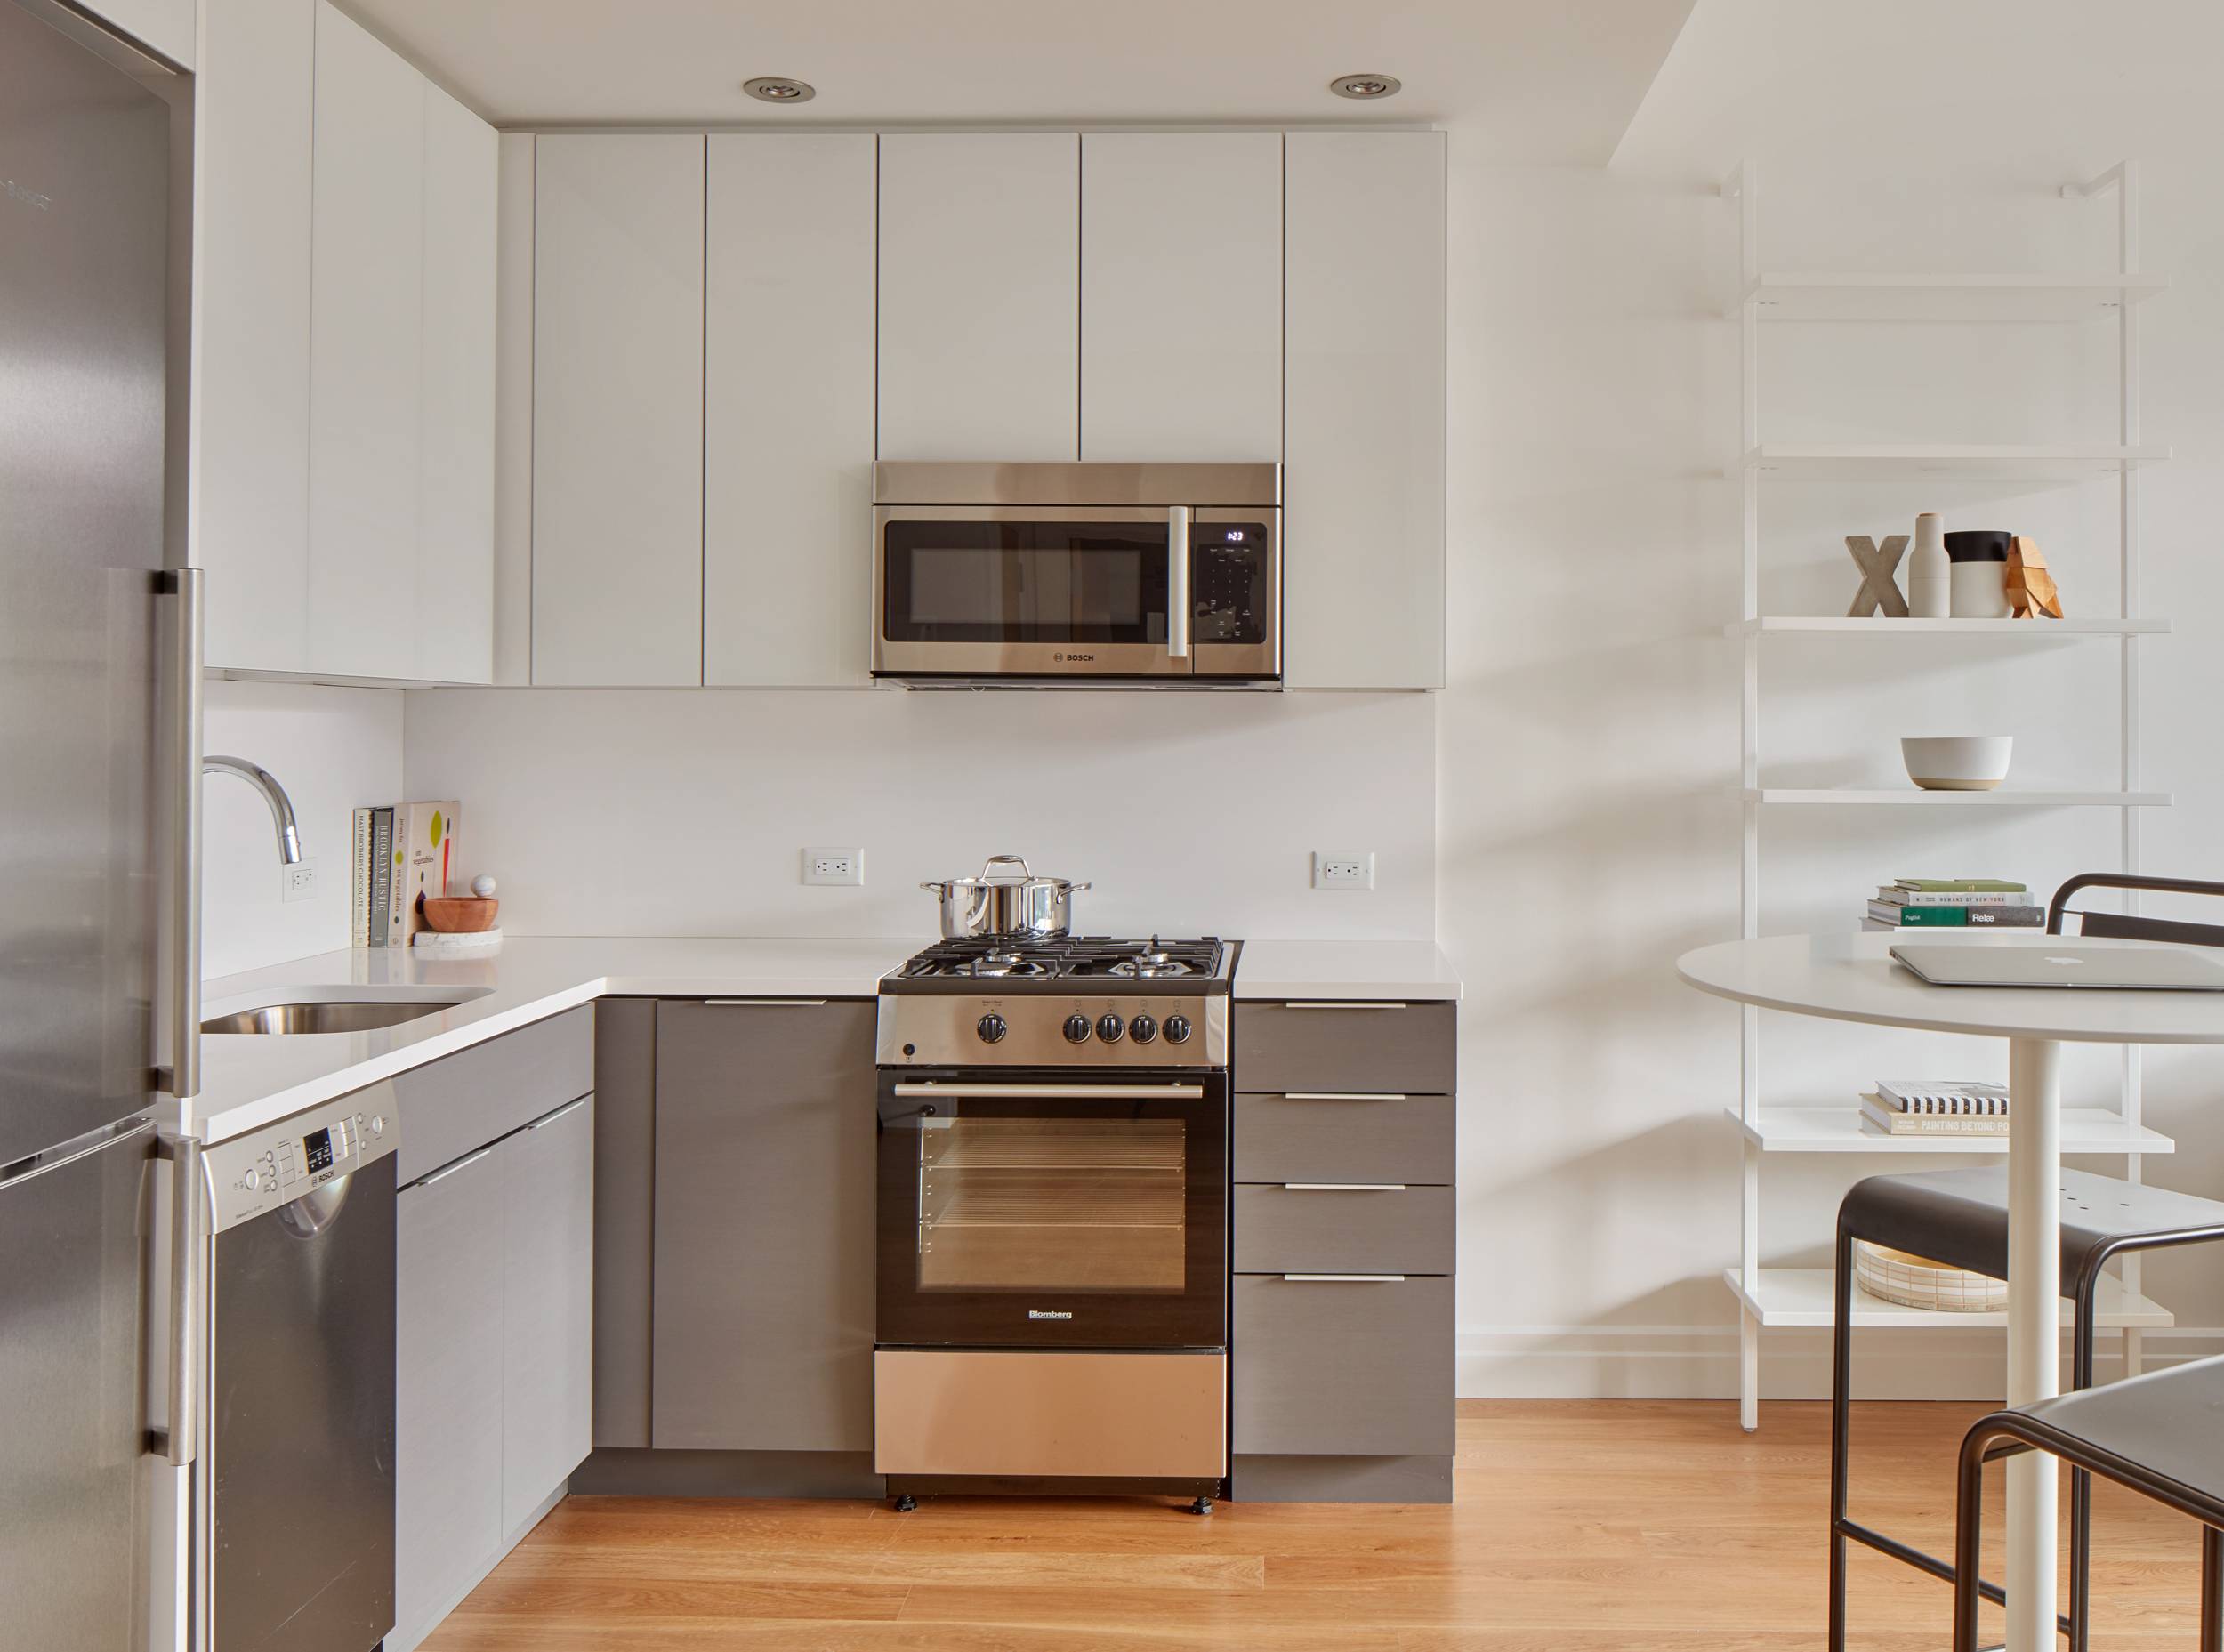 WILLIAMSBURG Hi-Rise  *ONE BEDROOM* Custom Closets / Full Amenity / 24-Hour Security / Williamsburg Bridge & NYC River Views/ Minutes to Manhattan / Outdoor Rooftop / Terrace / BBQ Space / Lounge Room / Fitness Center